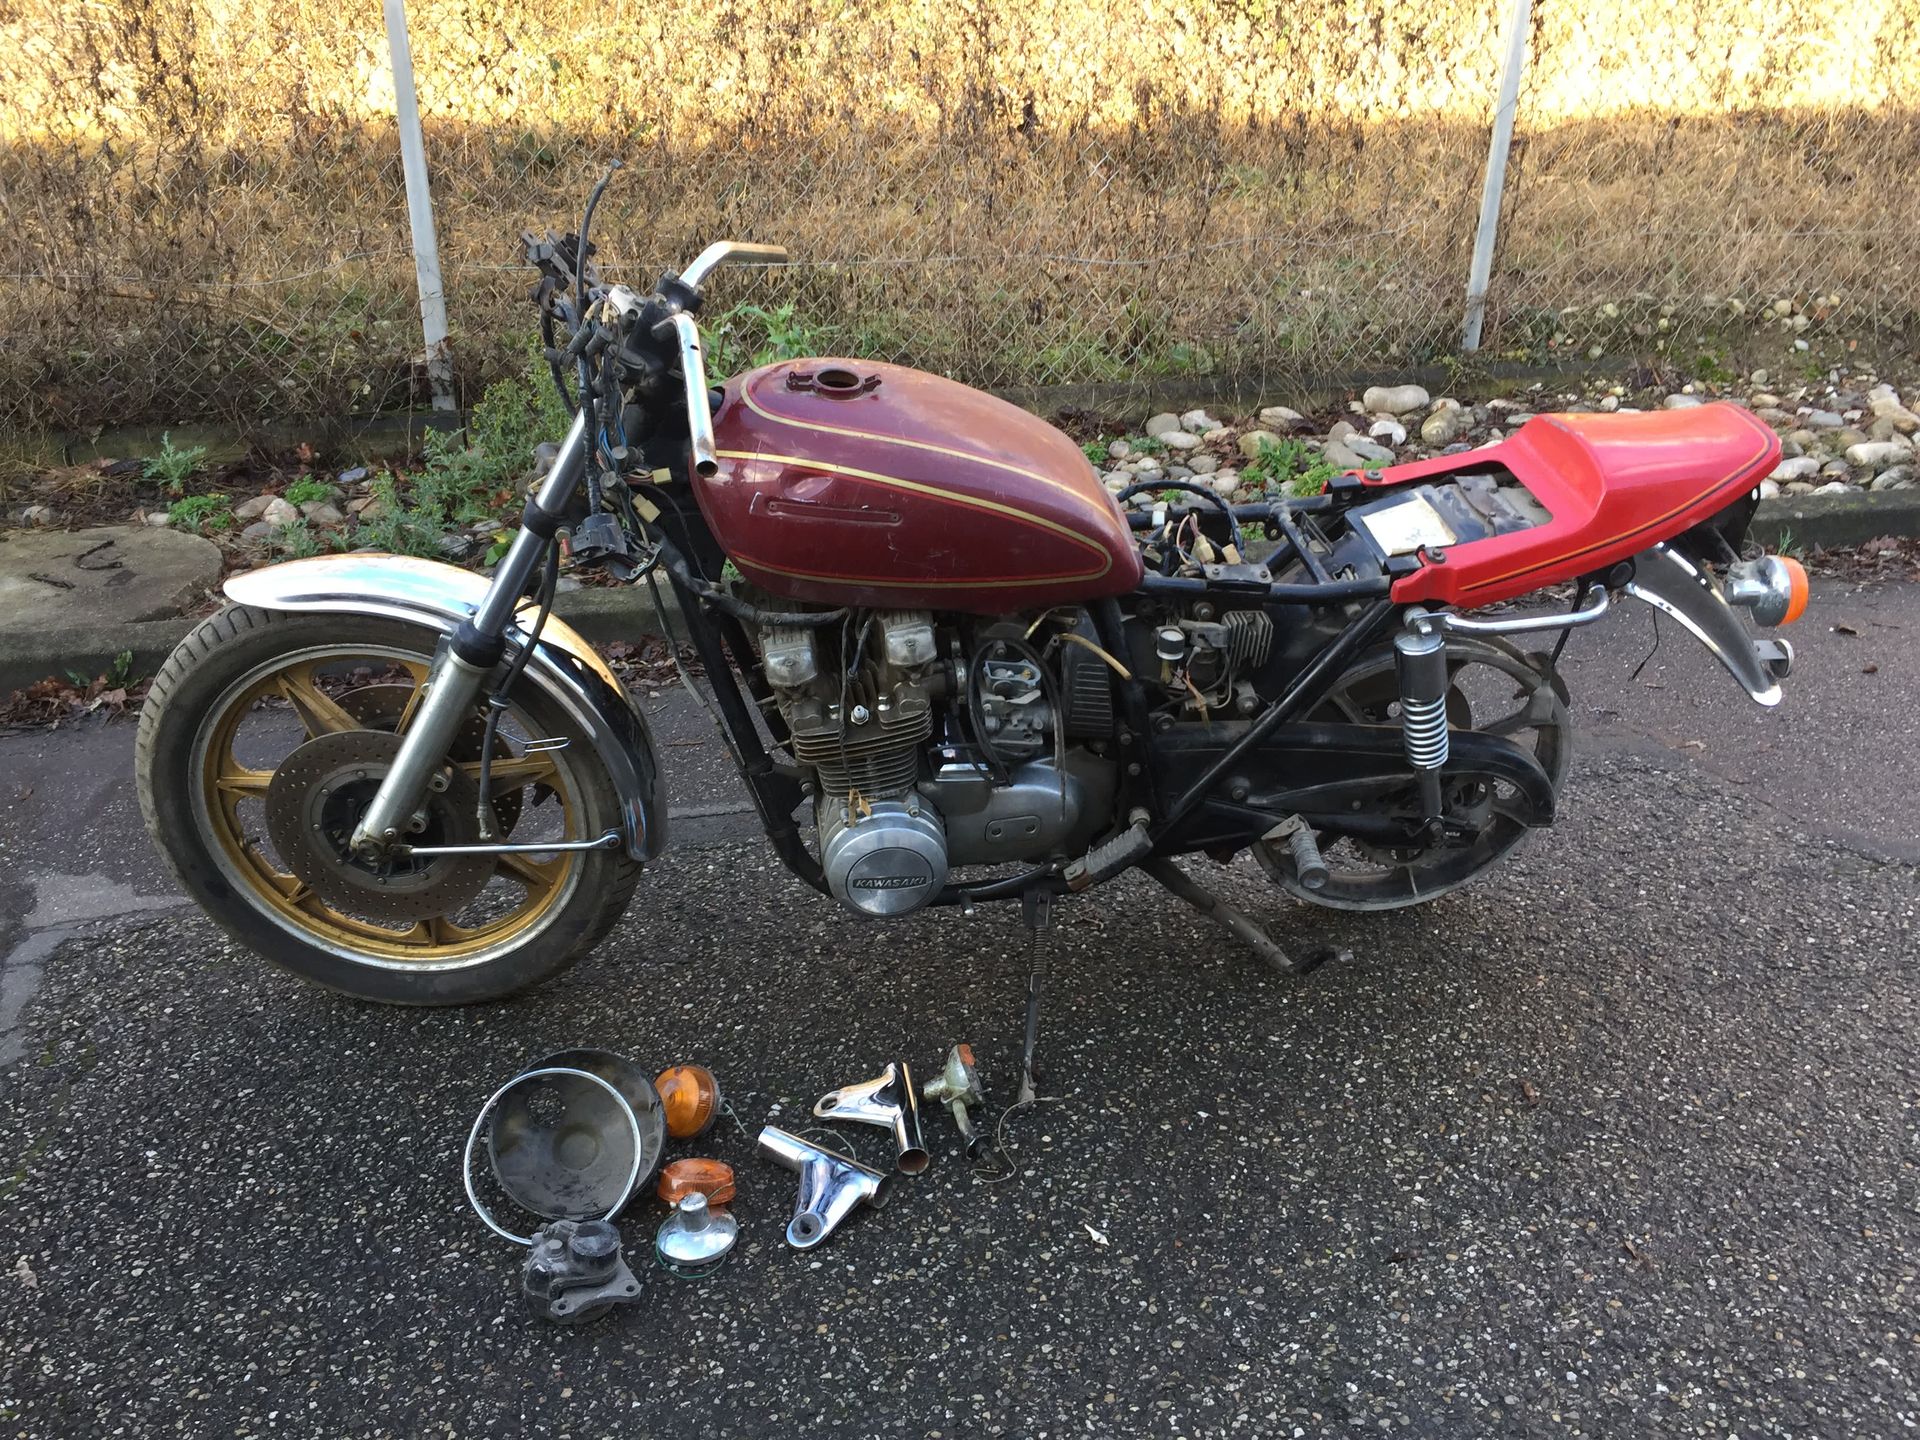 Kawasaki Z650 NO. KZ650-019097

Matching

To be restored and registered as a col&hellip;